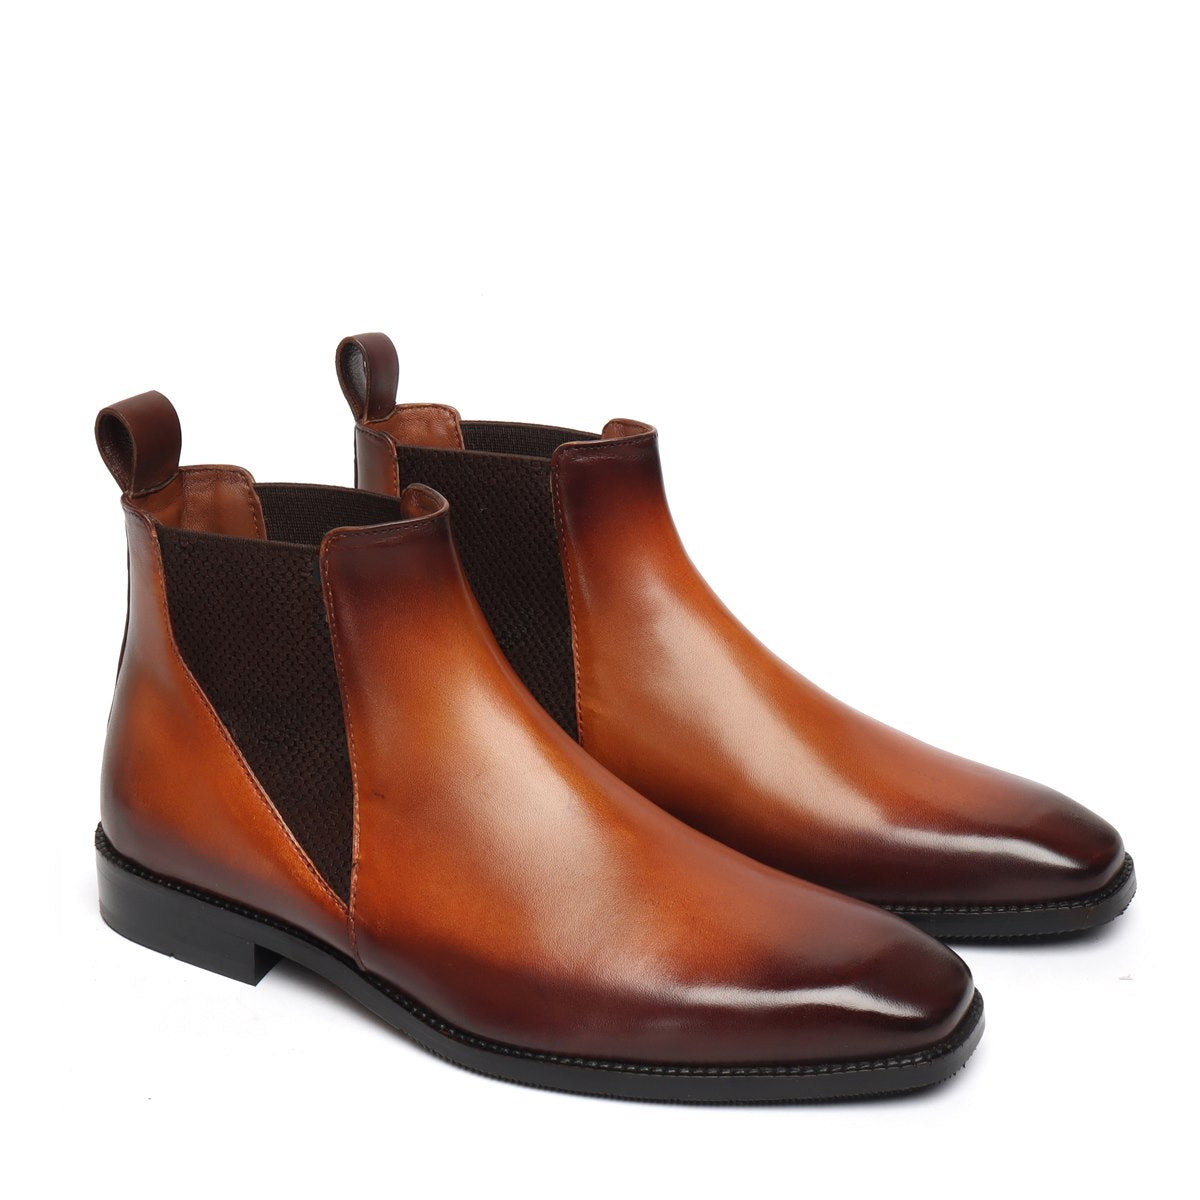 New shape Tan Leather Chelsea Boot by Brune & Bareskin with a Stylish Sharp Elastic Design